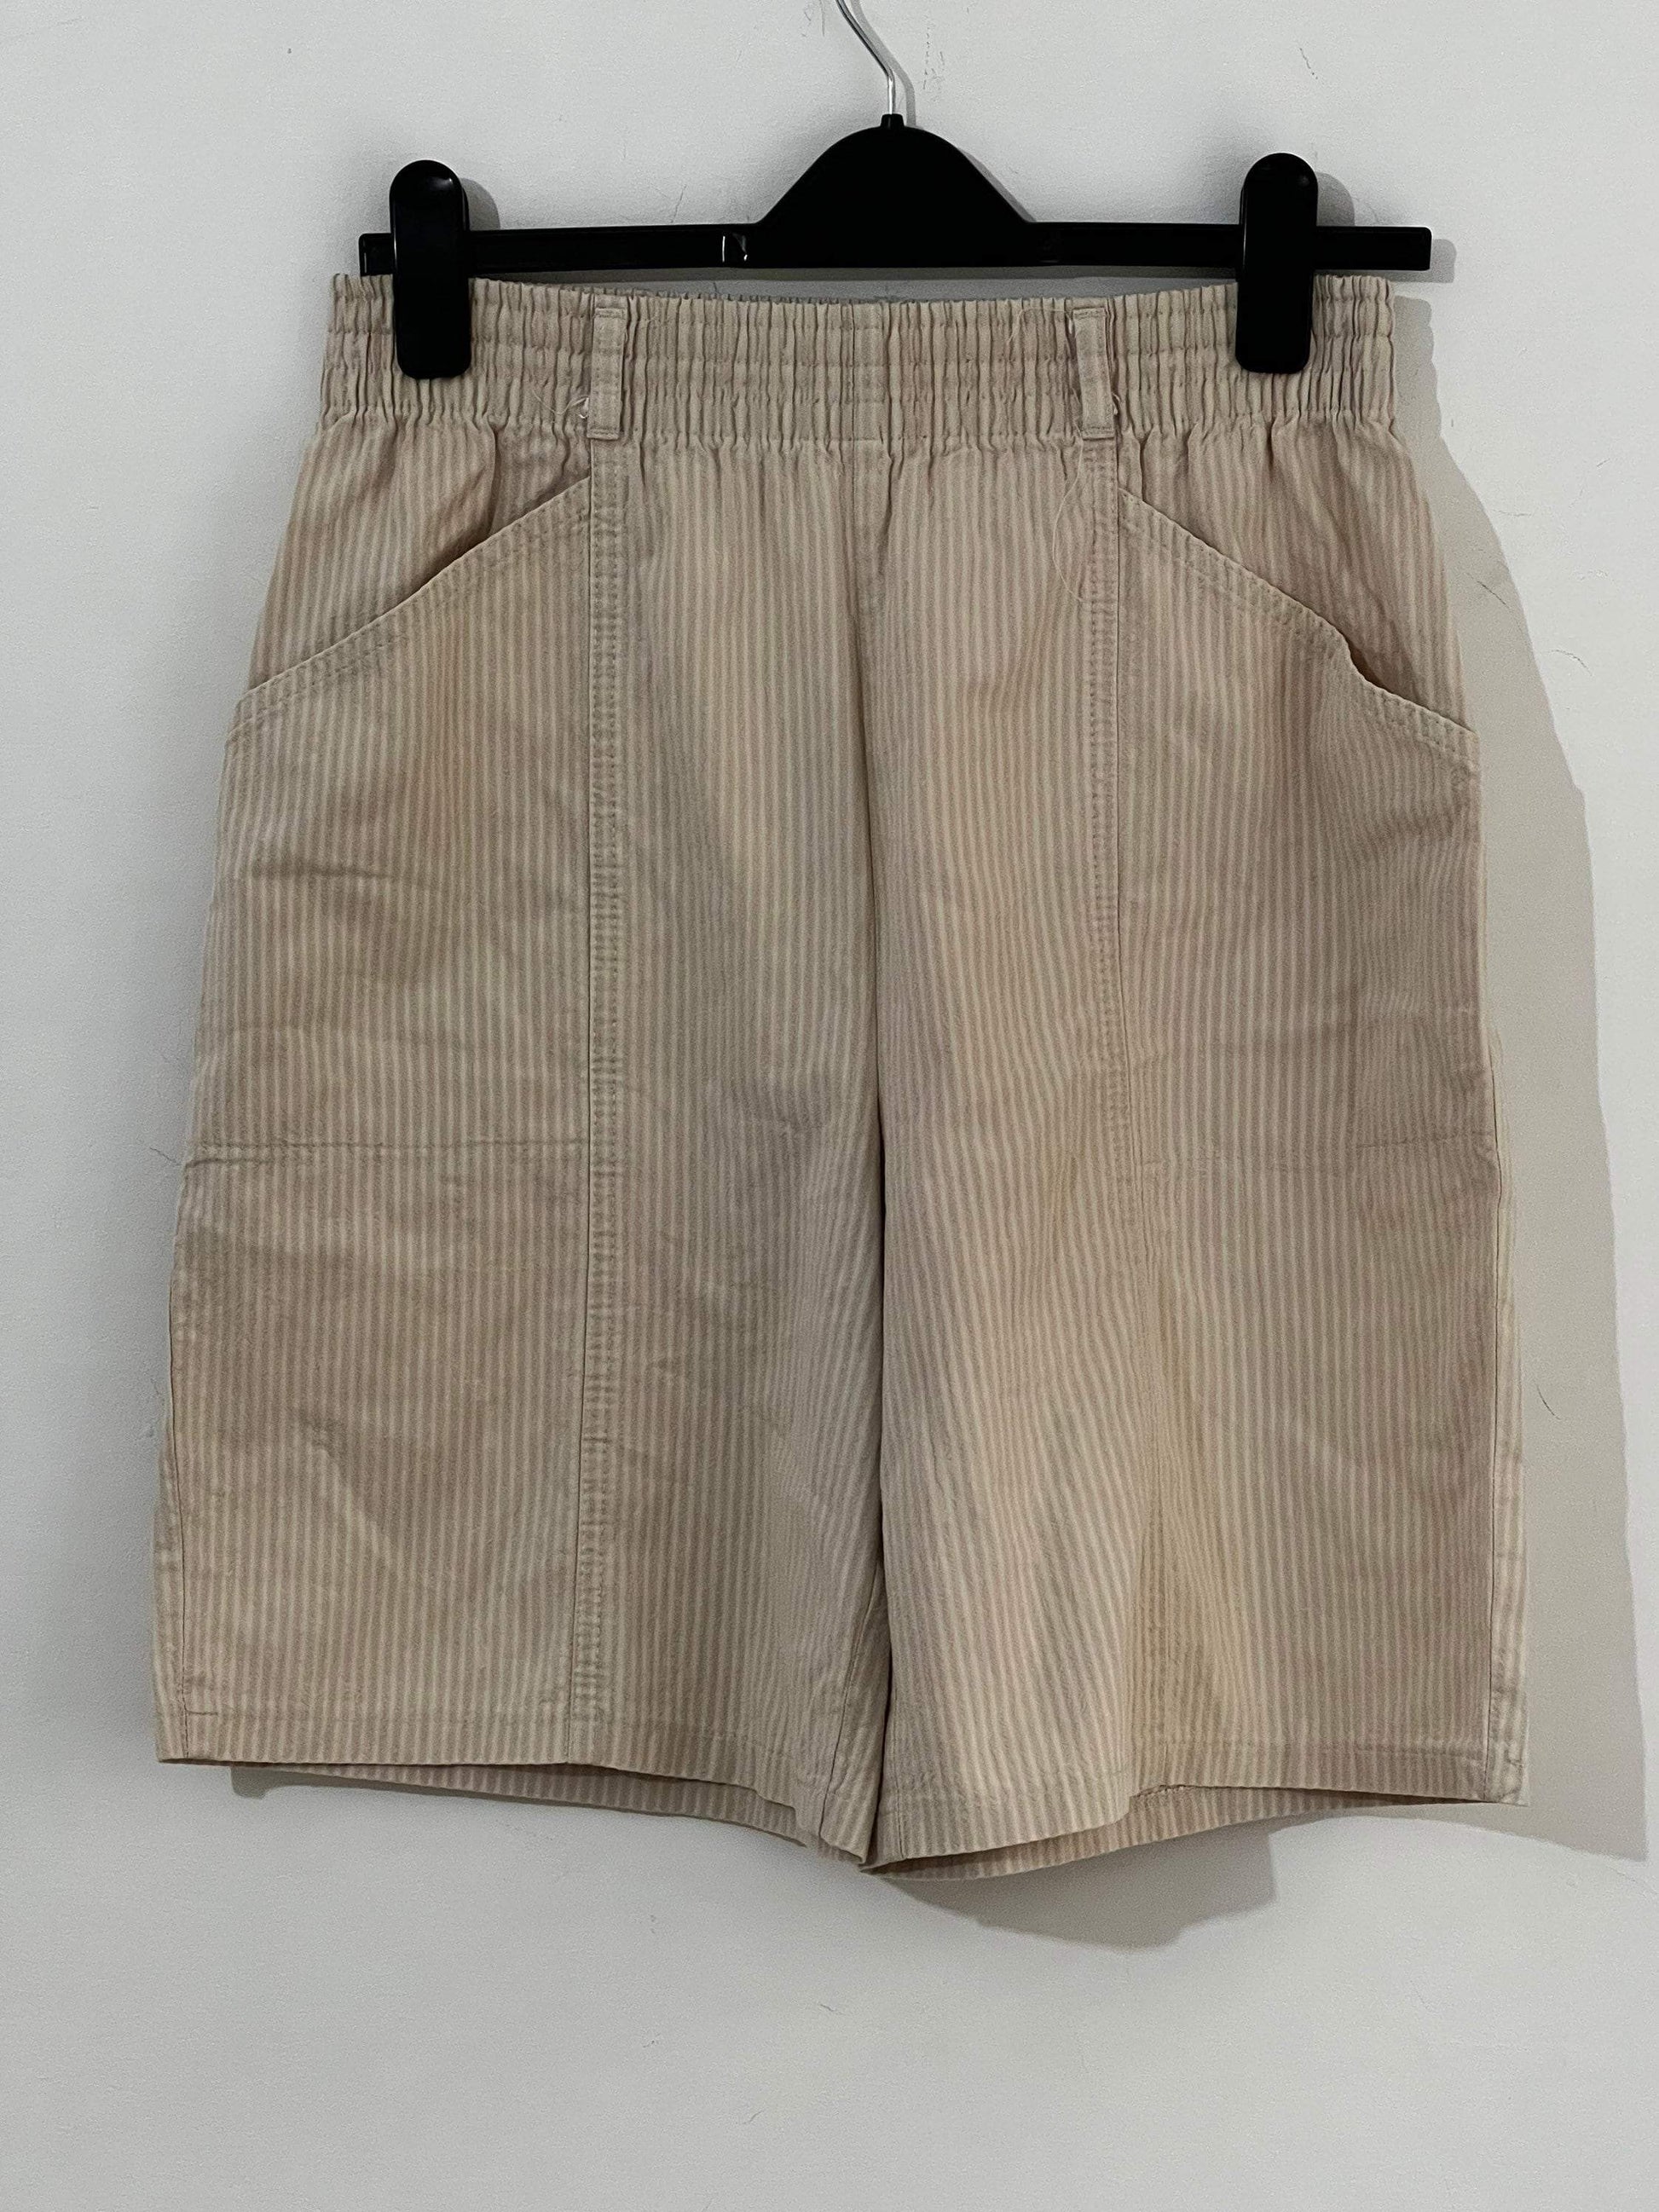 Vintage Smart shorts Vintage Smart shorts - Beige Stripe- Golf Shorts UK Size 12 Pretty Vintage - Hand Curated Vintage Clothing Boutique